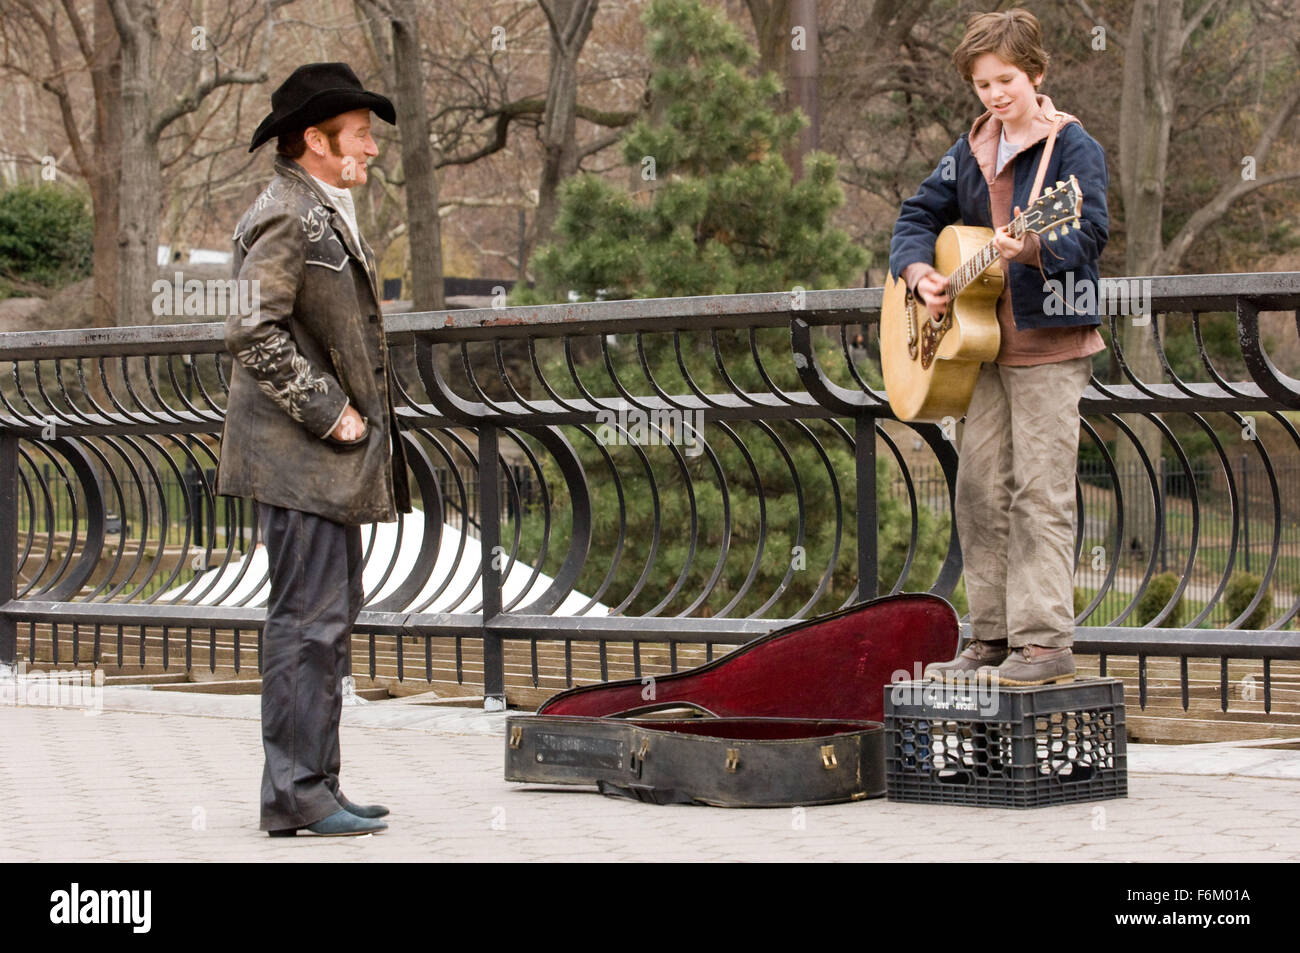 RELEASE DATE: Oct 21, 2007. MOVIE TITLE: August Rush. STUDIO: CJ Entertainment. PLOT: The story of a charismatic young Irish guitarist and a sheltered young cellist who have a chance encounter one magical night above New York's Washington Square, but are soon torn apart, leaving in their wake an infant, August Rush, orphaned by circumstance. Now performing on the streets of New York and cared for by a mysterious stranger, August uses his remarkable musical talent to seek the parents from whom he was separated at birth. PICTURED: ROBIN WILLIAMS as Maxwell 'Wizard' Wallace, FREDDIE HIGHMORE as E Stock Photo